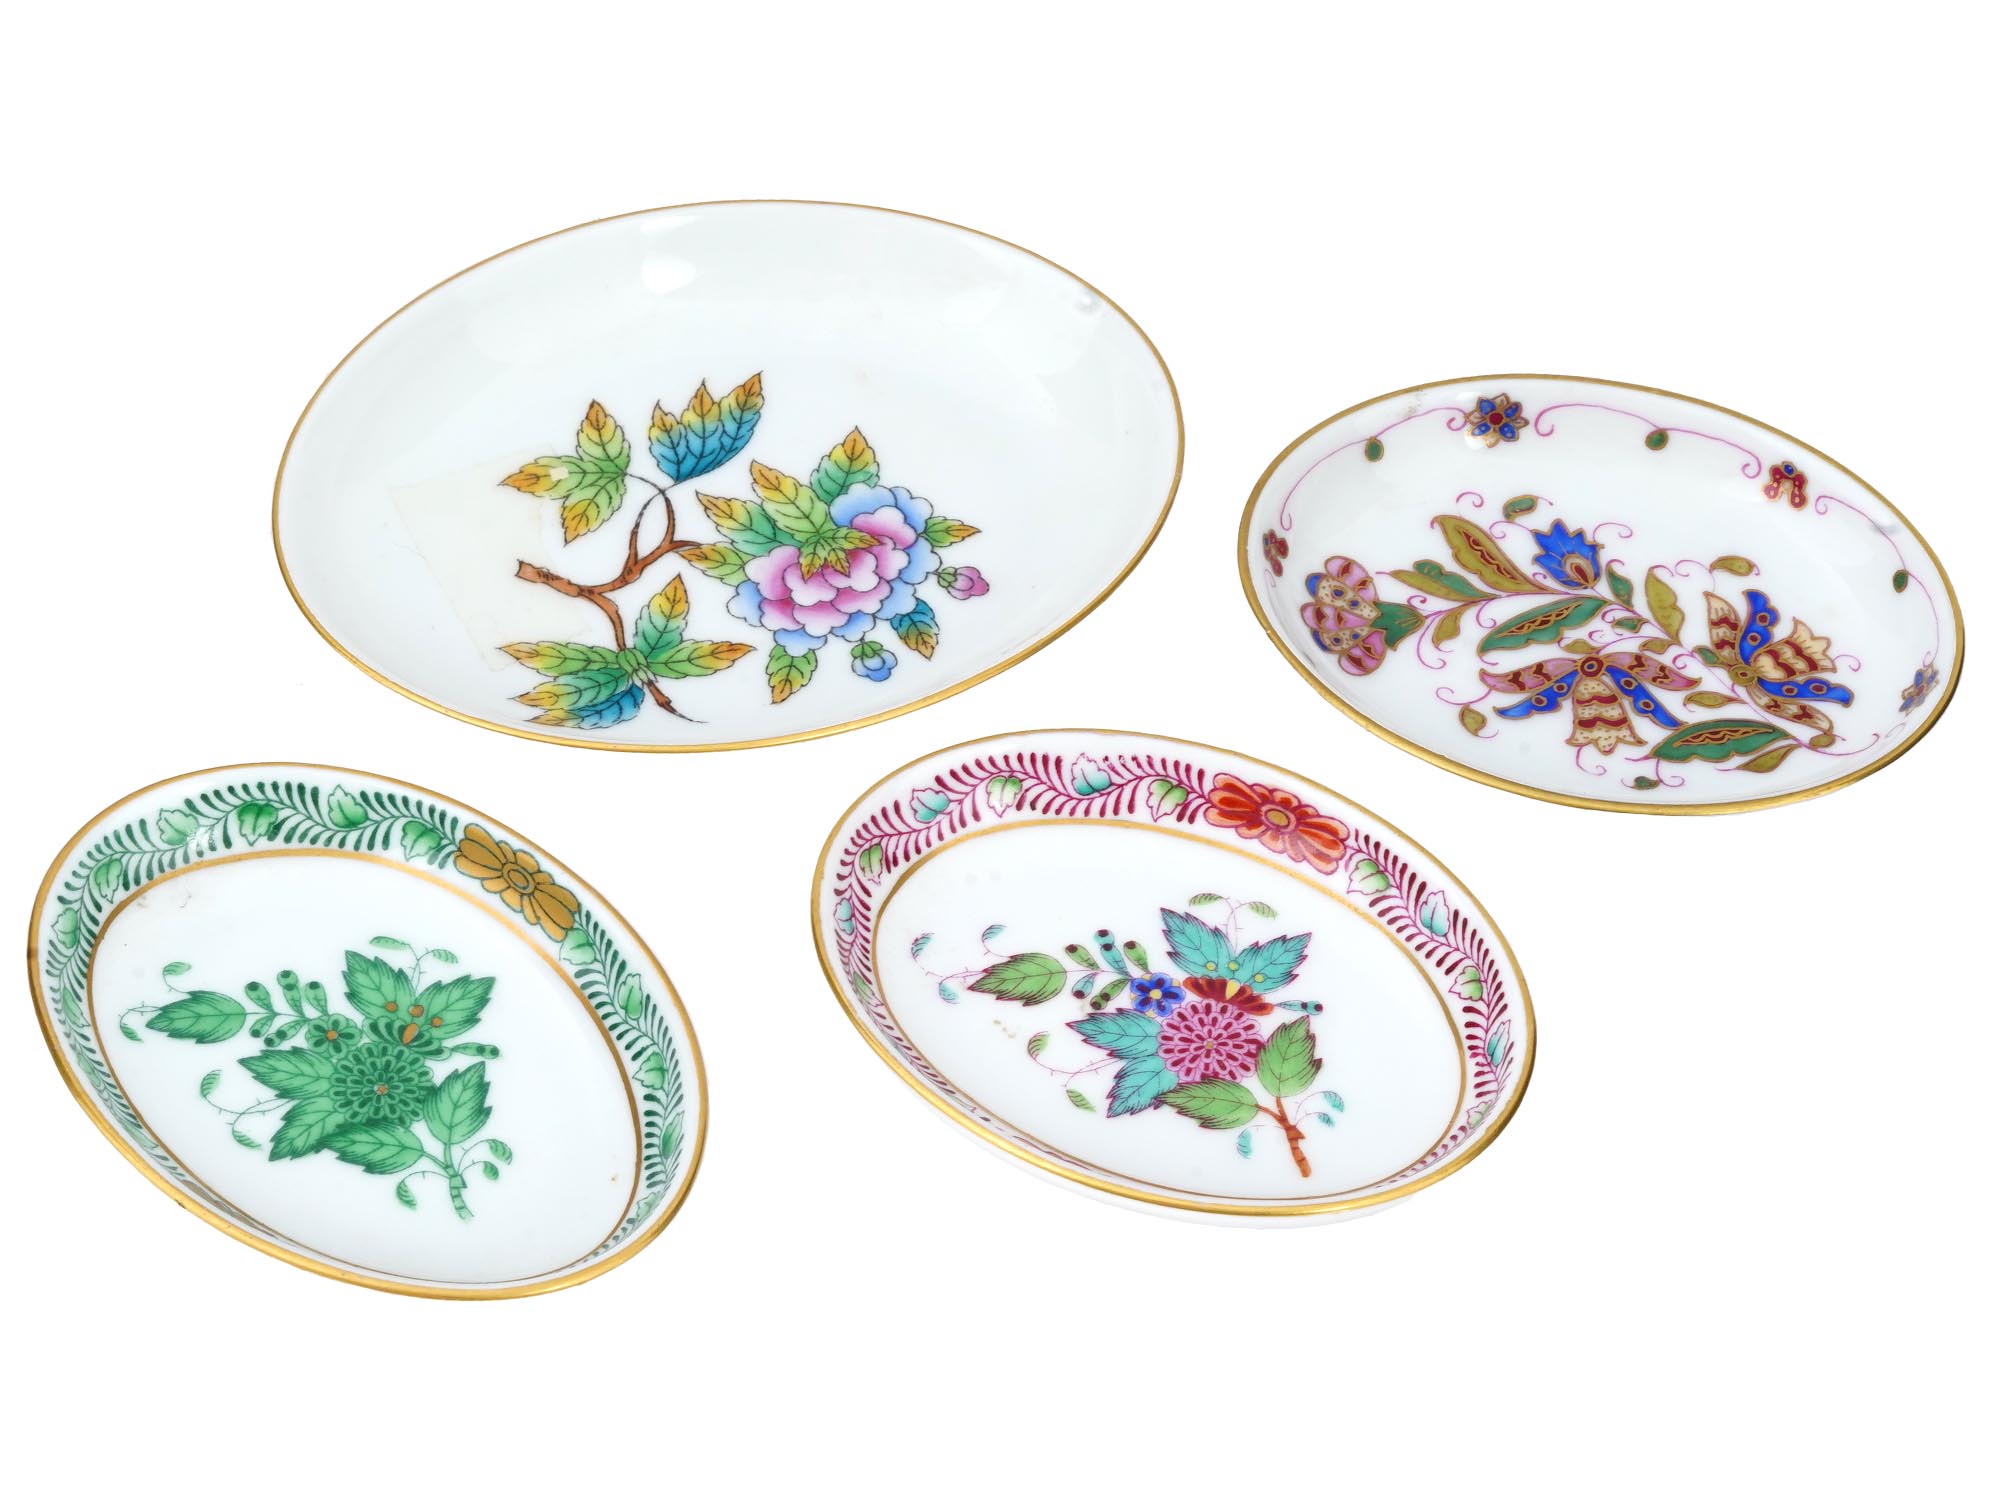 HUNGARIAN MINIATURE PORCELAIN PLATES BY HEREND PIC-0